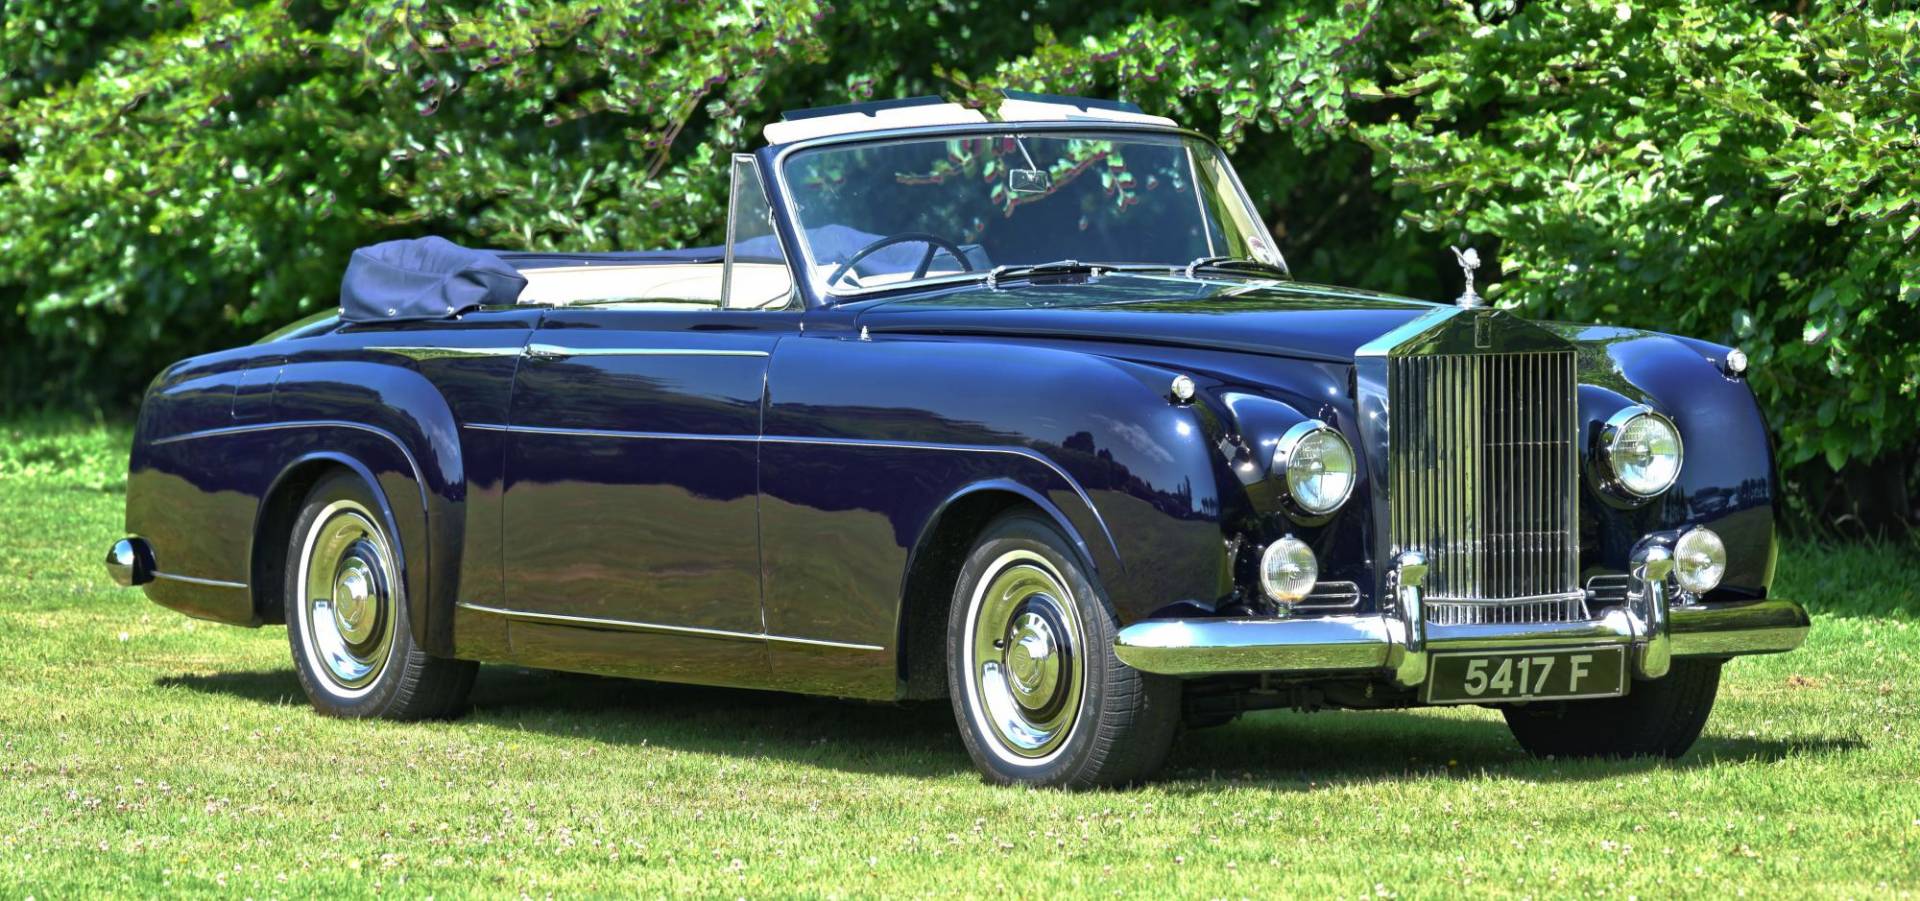 For Sale: Rolls-Royce Silver Cloud I Mulliner (1959) offered for GBP ...